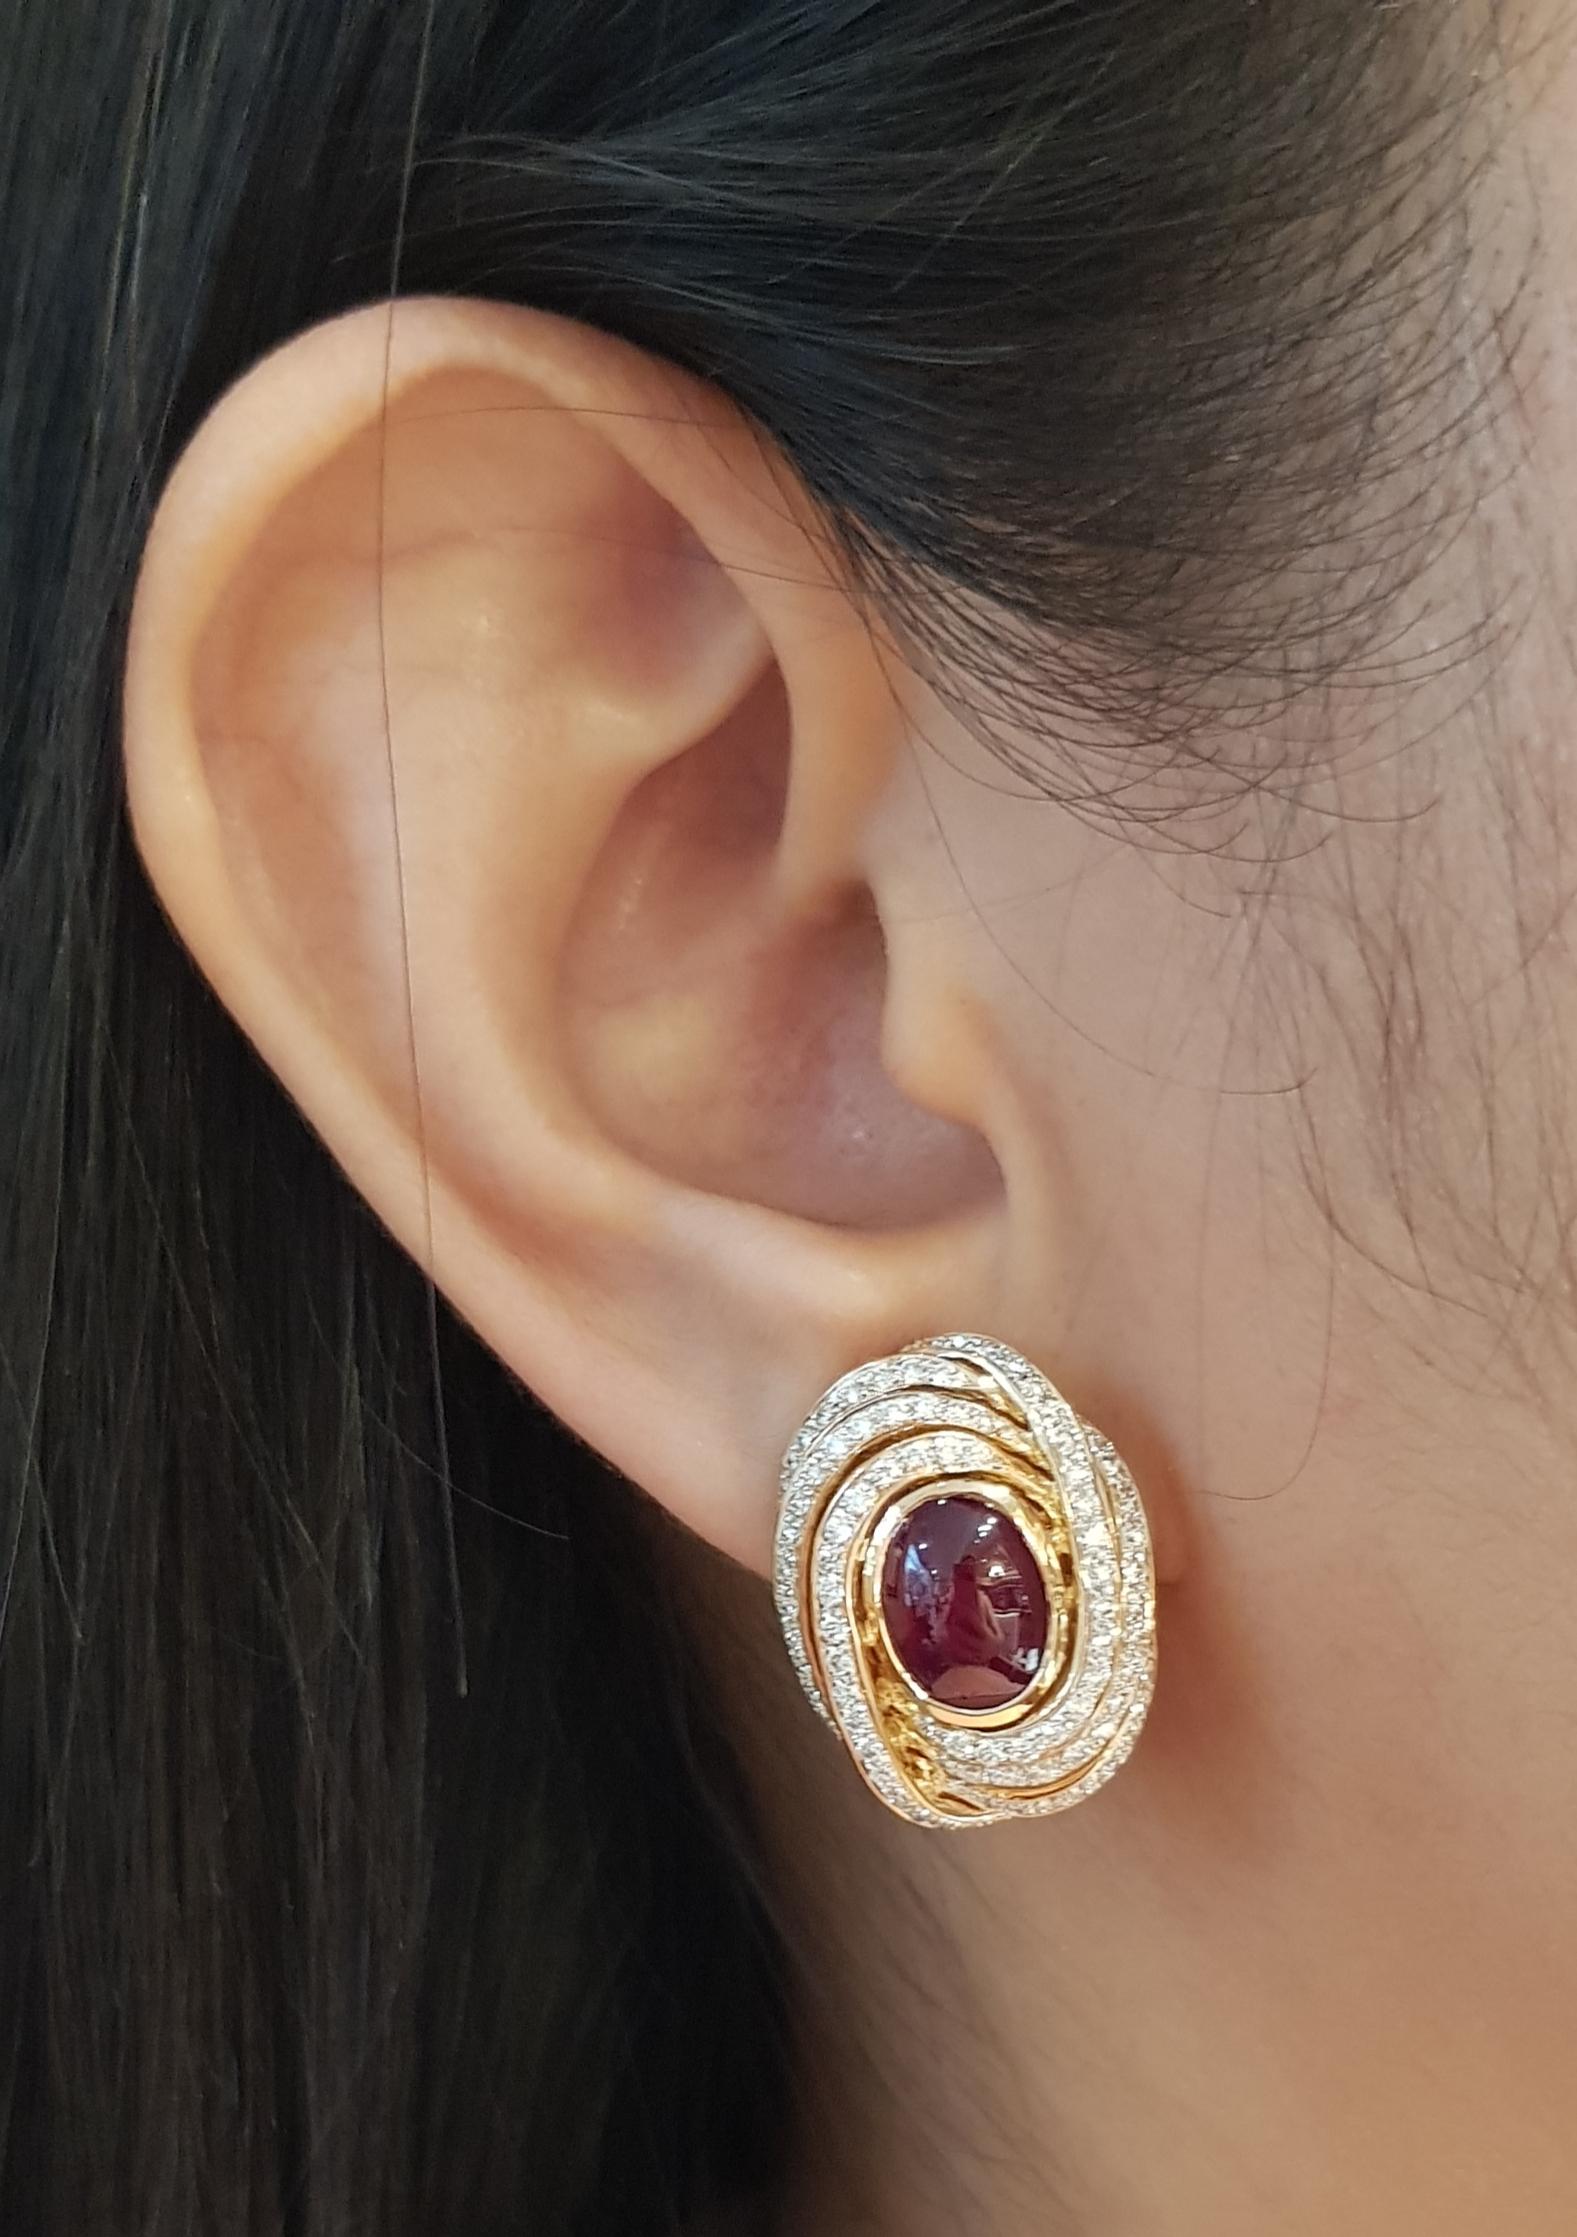 Cabochon Ruby 3.56 carats with Diamond 1.47 carats Earrings set in 18K Rose Gold Settings

Width: 1.7 cm 
Length: 2.4 cm
Total Weight: 15.94 grams

